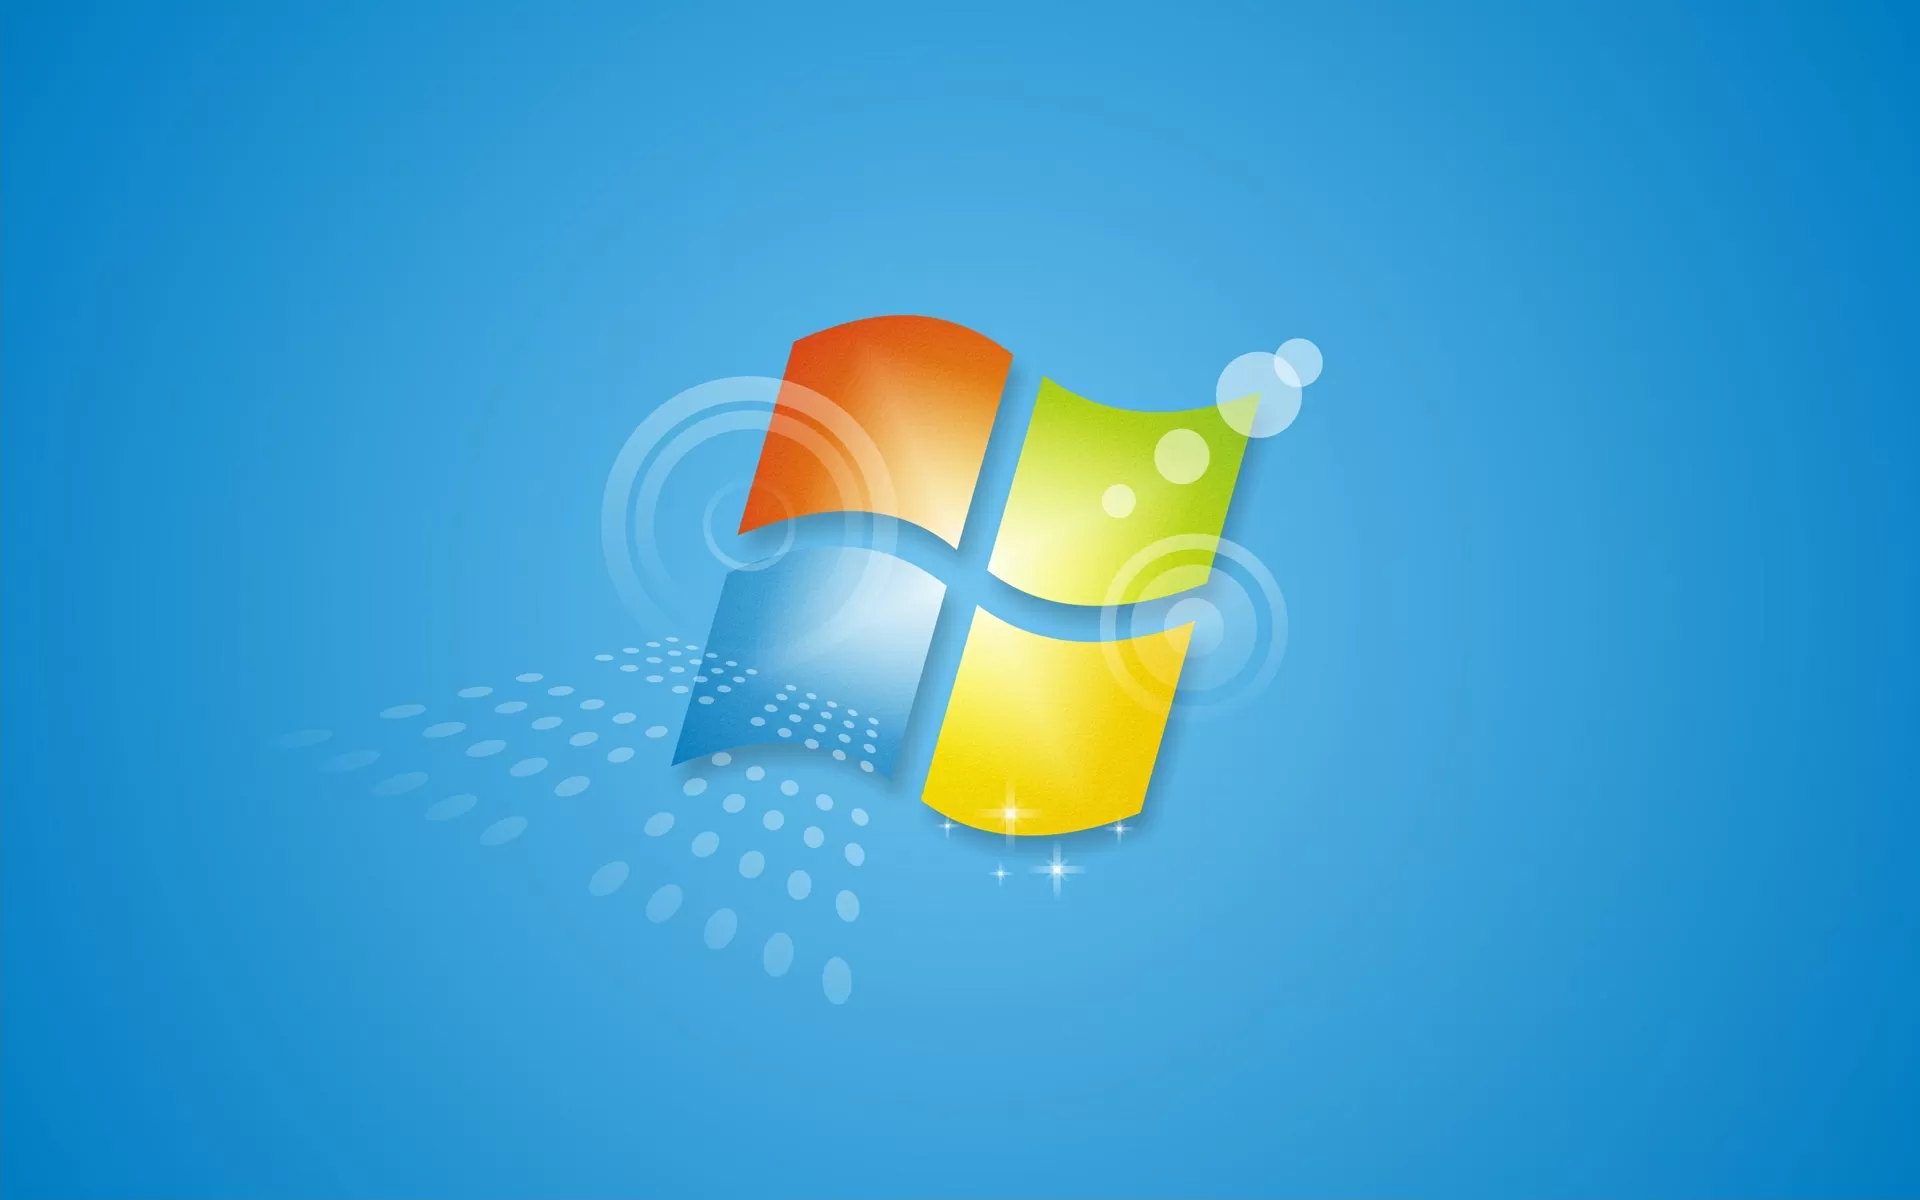 More people started using Windows 7 last month